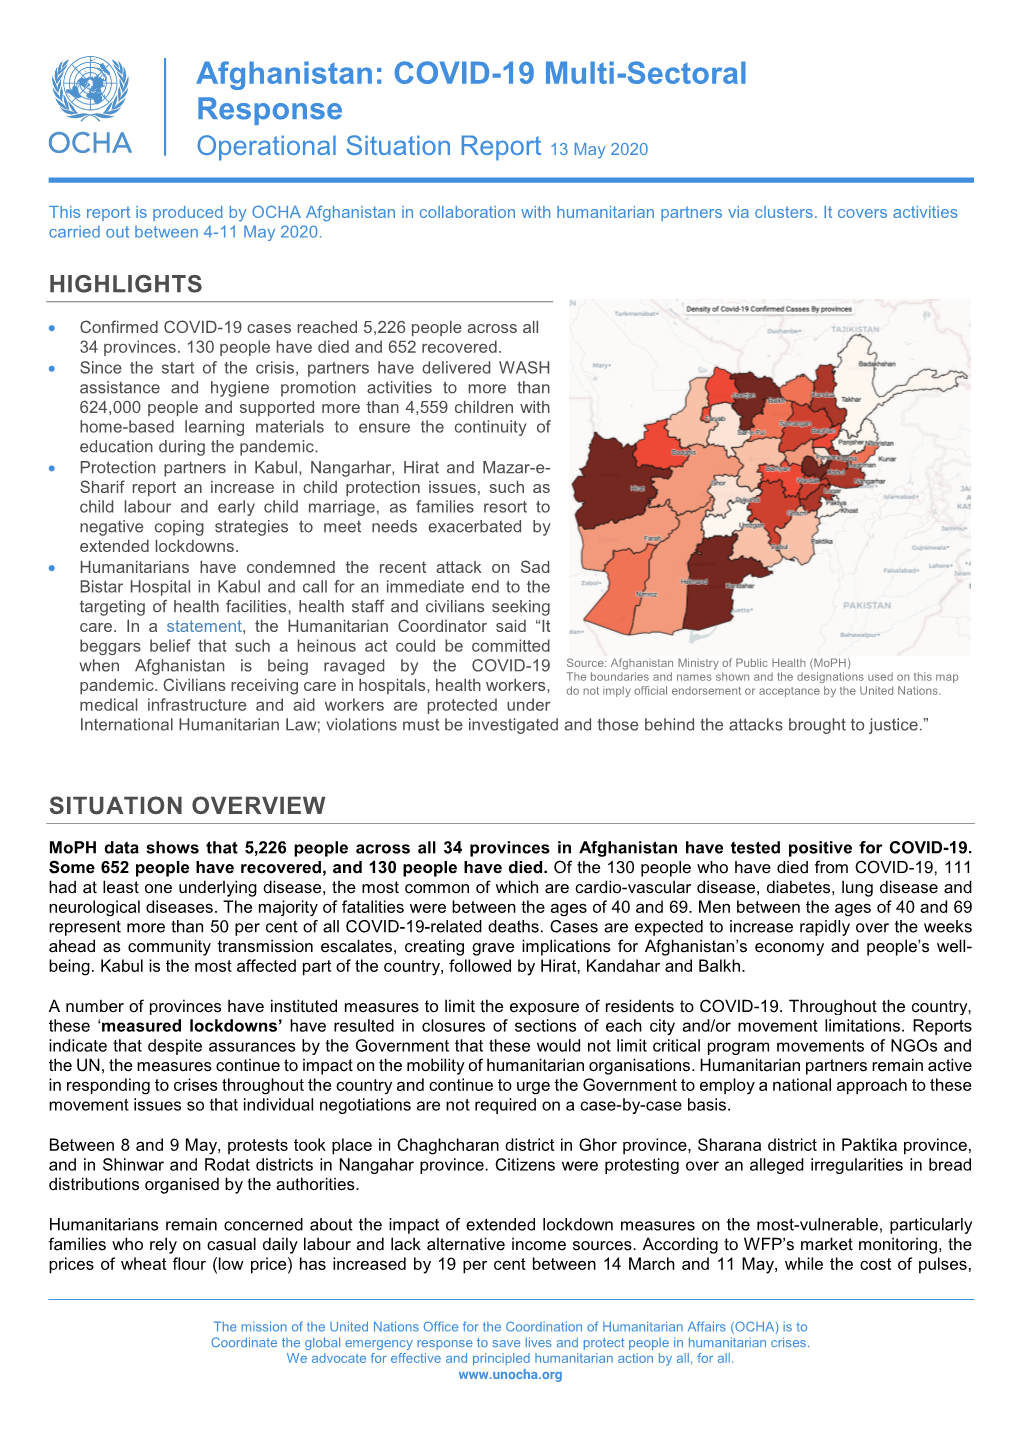 Afghanistan: COVID-19 Multi-Sectoral Response Operational Situation Report 13 May 2020